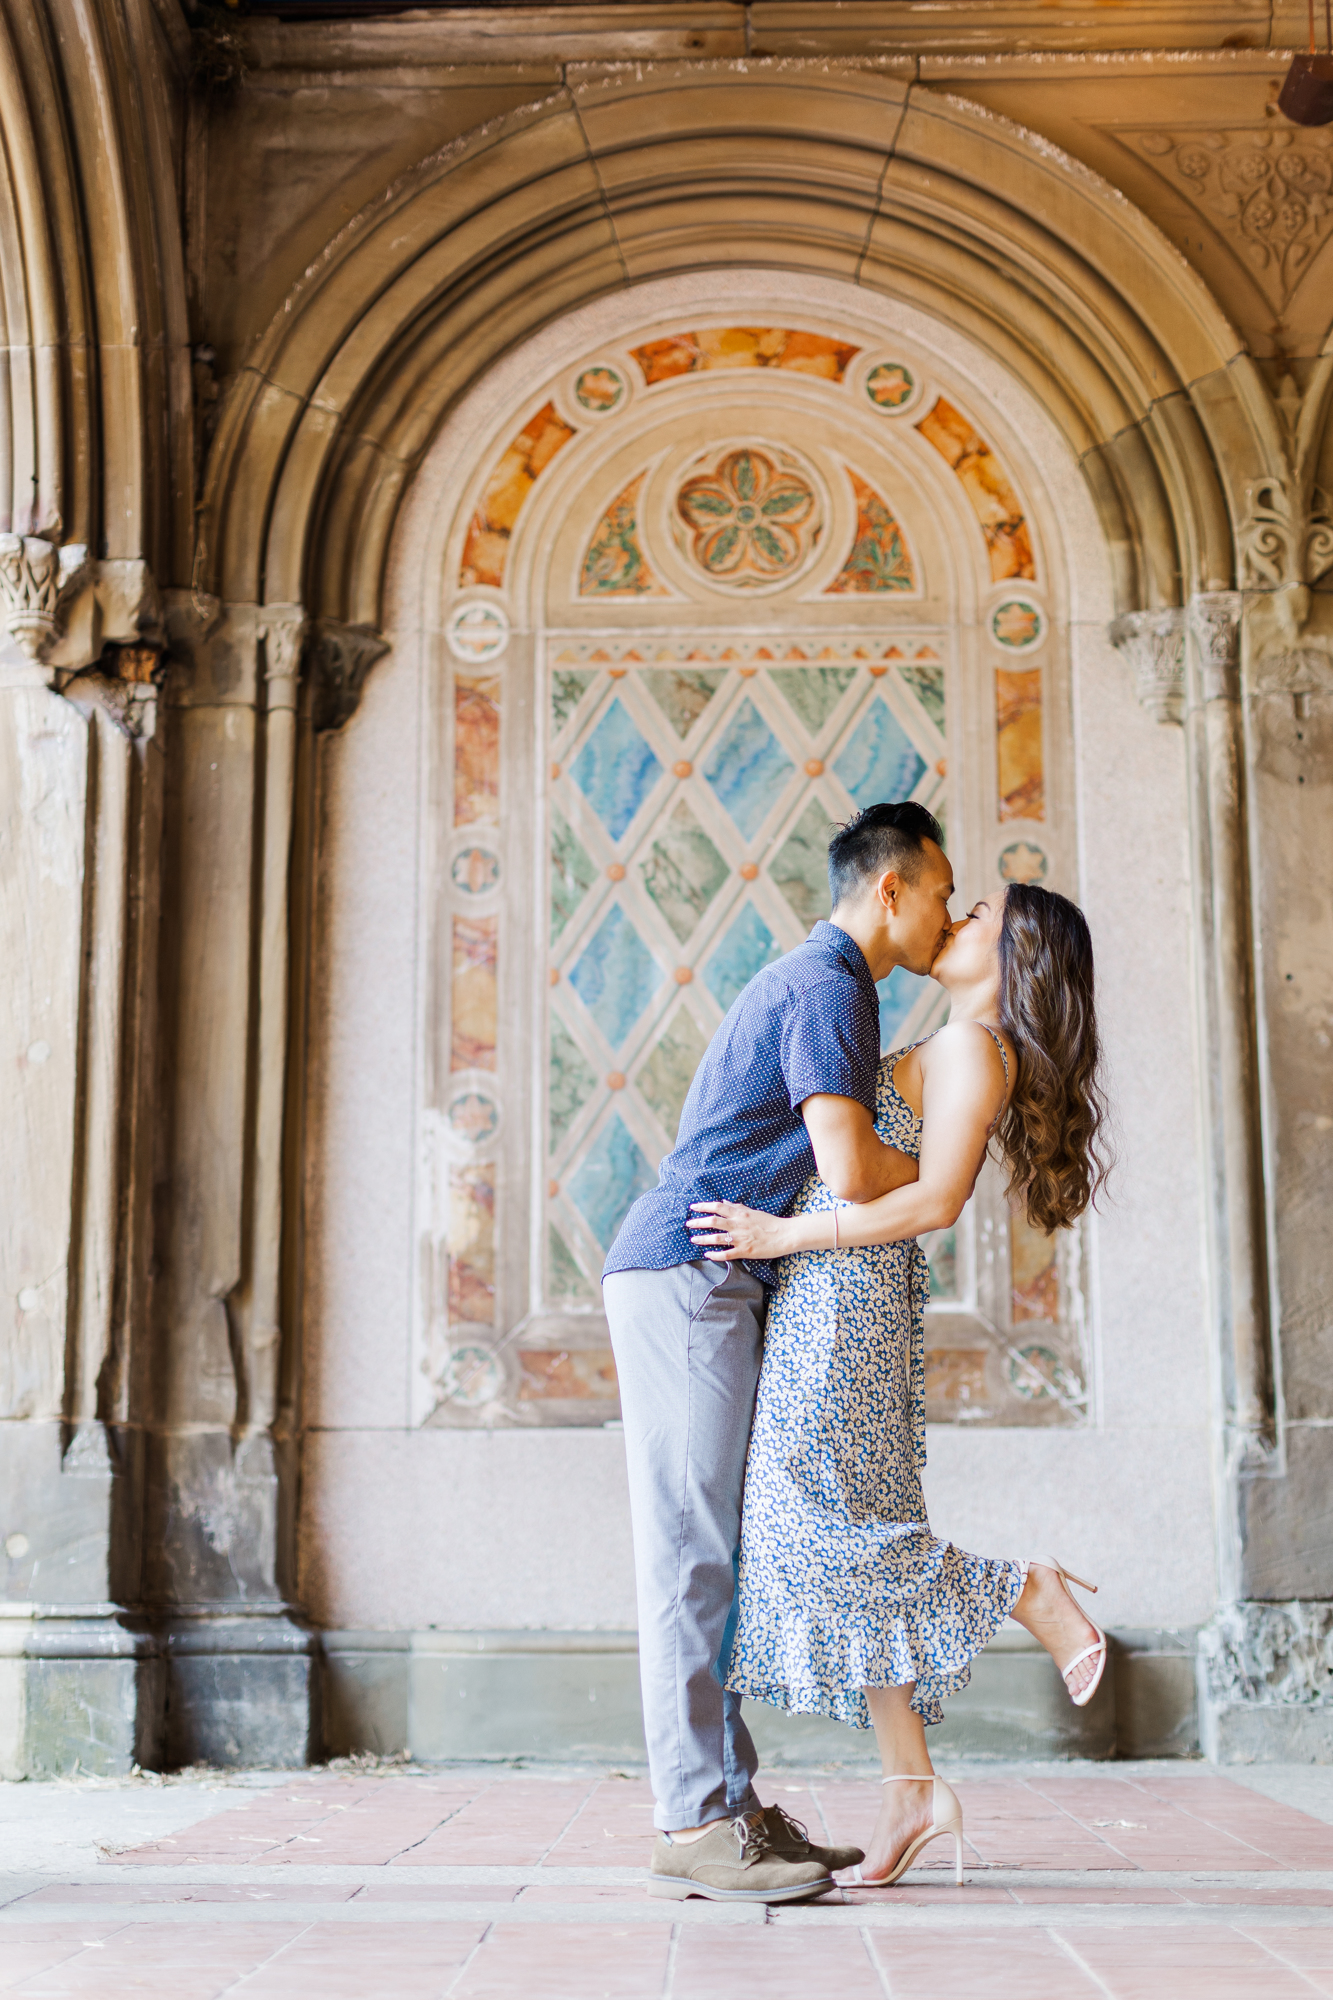 Intimate Engagement Photos in Central Park, New York